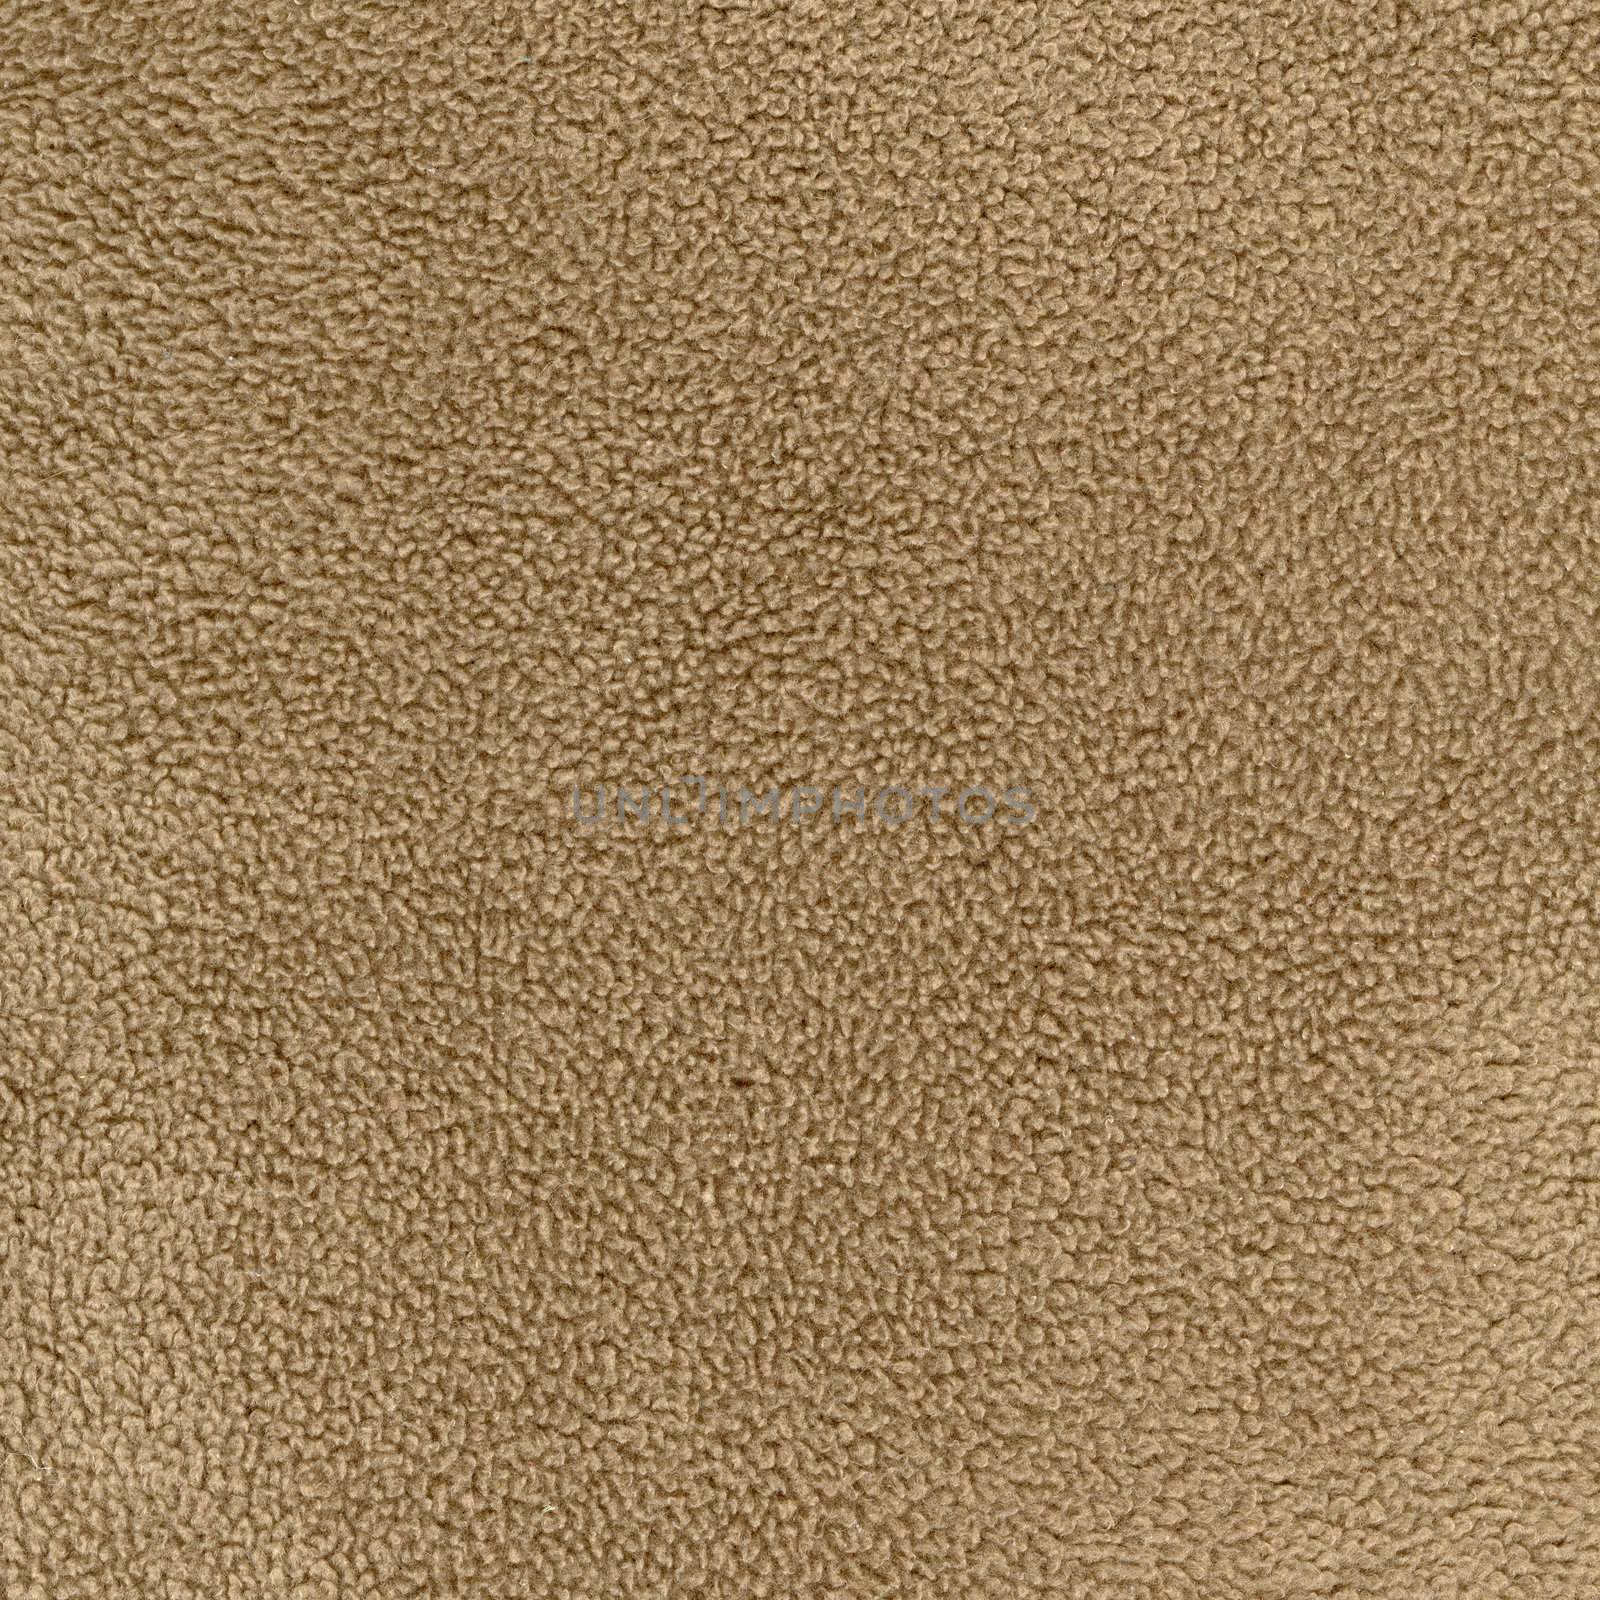 warm and soft synthetic beige fleece from sport clothing